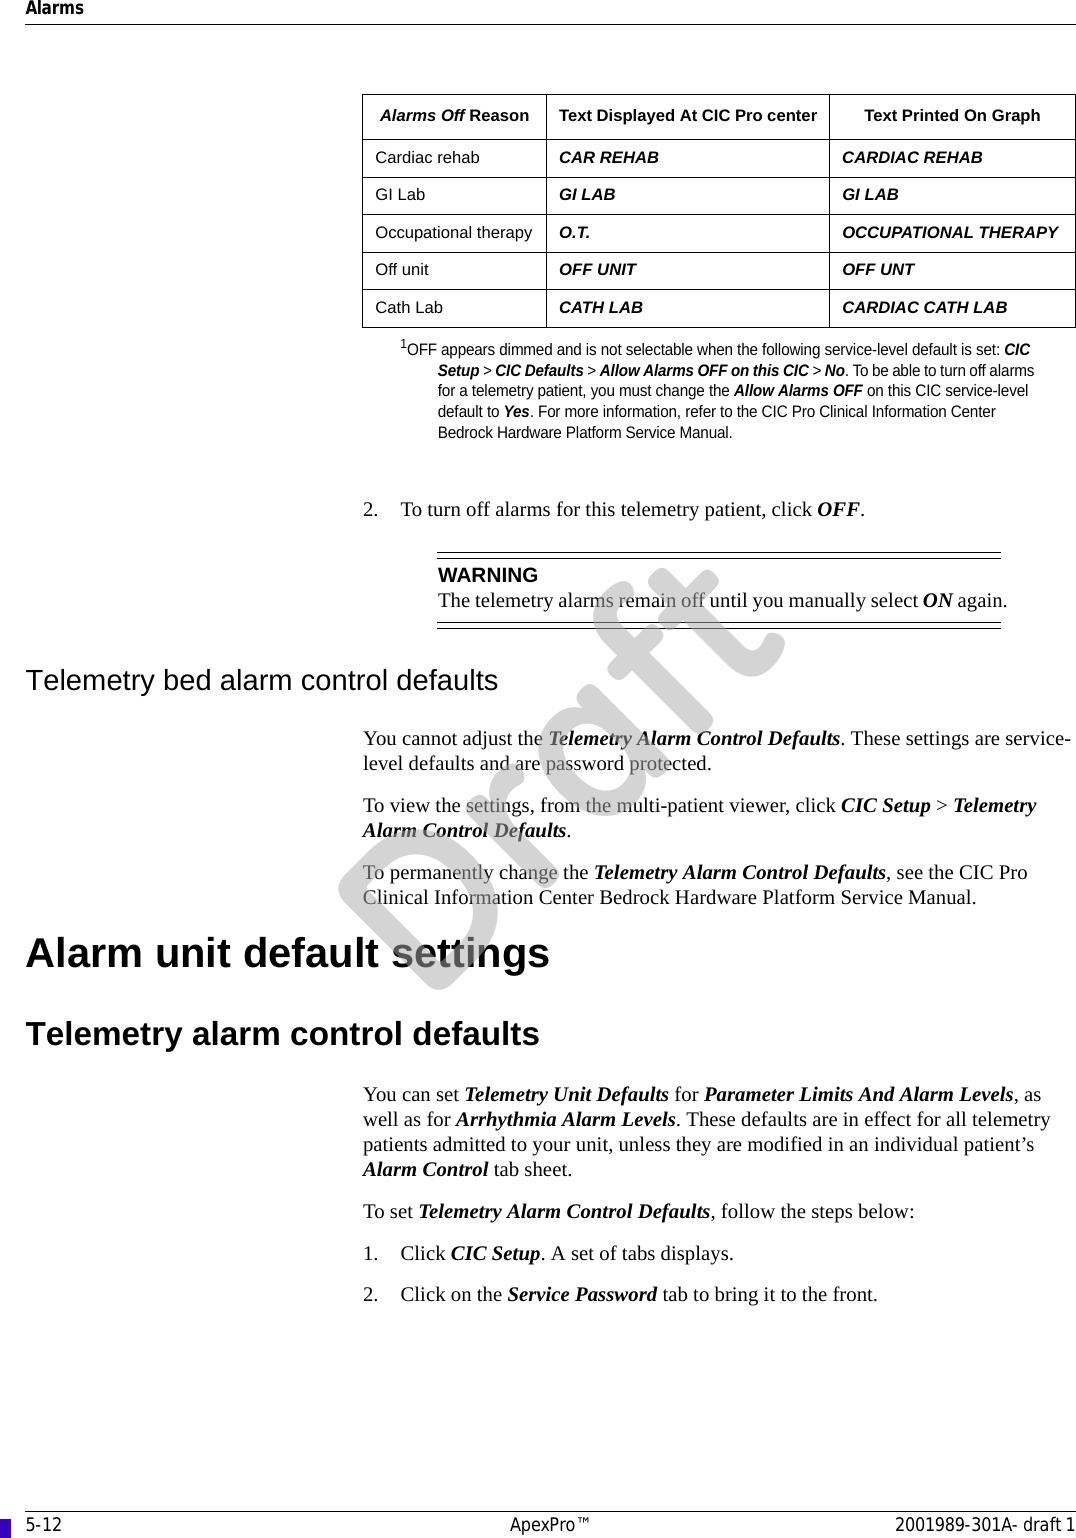 5-12 ApexPro™ 2001989-301A- draft 1Alarms2. To turn off alarms for this telemetry patient, click OFF.WARNINGThe telemetry alarms remain off until you manually select ON again.Telemetry bed alarm control defaultsYou cannot adjust the Telemetry Alarm Control Defaults. These settings are service-level defaults and are password protected.To view the settings, from the multi-patient viewer, click CIC Setup &gt; Telemetry Alarm Control Defaults.To permanently change the Telemetry Alarm Control Defaults, see the CIC Pro Clinical Information Center Bedrock Hardware Platform Service Manual.Alarm unit default settingsTelemetry alarm control defaultsYou can set Telemetry Unit Defaults for Parameter Limits And Alarm Levels, as well as for Arrhythmia Alarm Levels. These defaults are in effect for all telemetry patients admitted to your unit, unless they are modified in an individual patient’s Alarm Control tab sheet.To set Telemetry Alarm Control Defaults, follow the steps below:1. Click CIC Setup. A set of tabs displays.2. Click on the Service Password tab to bring it to the front.Cardiac rehab CAR REHAB CARDIAC REHABGI Lab GI LAB GI LABOccupational therapy O.T. OCCUPATIONAL THERAPYOff unit OFF UNIT OFF UNTCath Lab CATH LAB CARDIAC CATH LAB1OFF appears dimmed and is not selectable when the following service-level default is set: CIC Setup &gt; CIC Defaults &gt; Allow Alarms OFF on this CIC &gt; No. To be able to turn off alarms for a telemetry patient, you must change the Allow Alarms OFF on this CIC service-level default to Yes. For more information, refer to the CIC Pro Clinical Information Center Bedrock Hardware Platform Service Manual.Alarms Off Reason Text Displayed At CIC Pro center Text Printed On GraphDraft